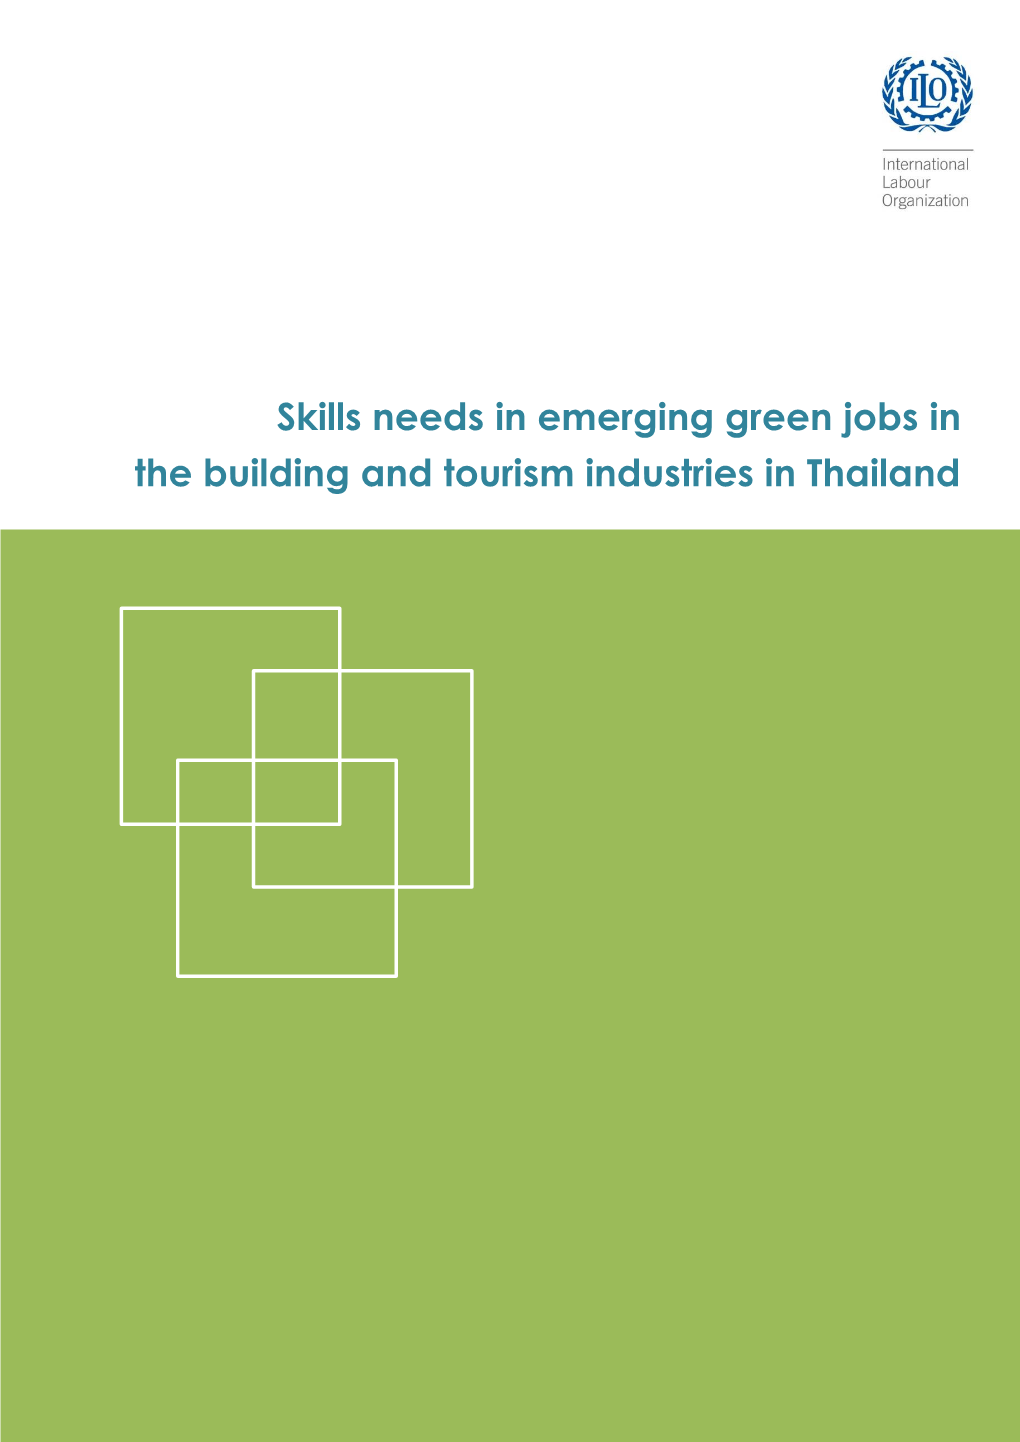 Skills Needs in Emerging Green Jobs in the Building and Tourism Industries in Thailand